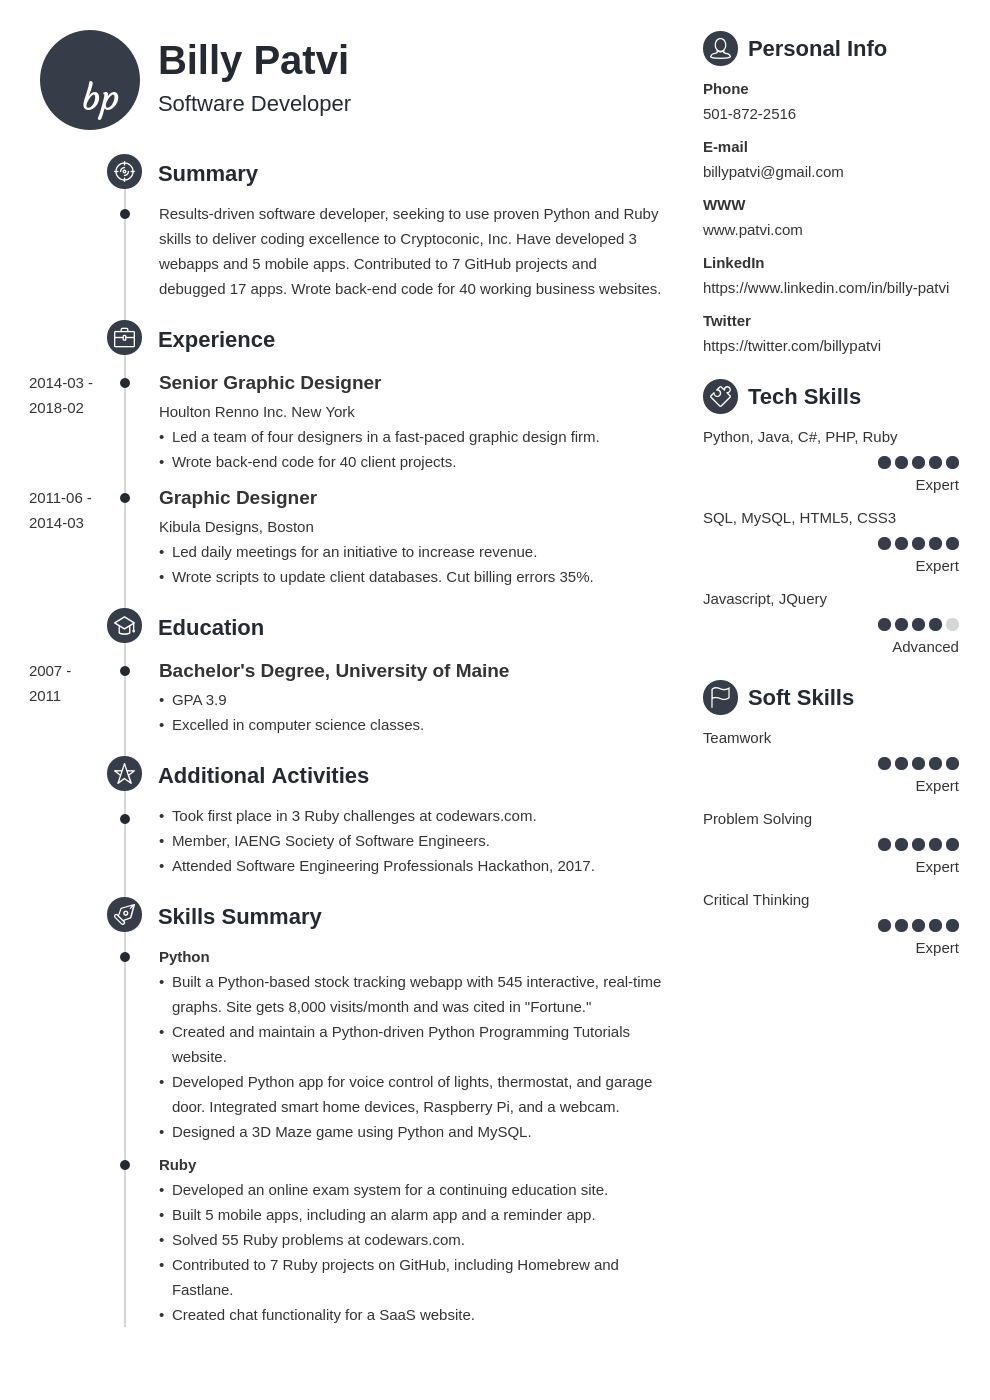 Career Change Resume Example (Guide with Samples & Tips)